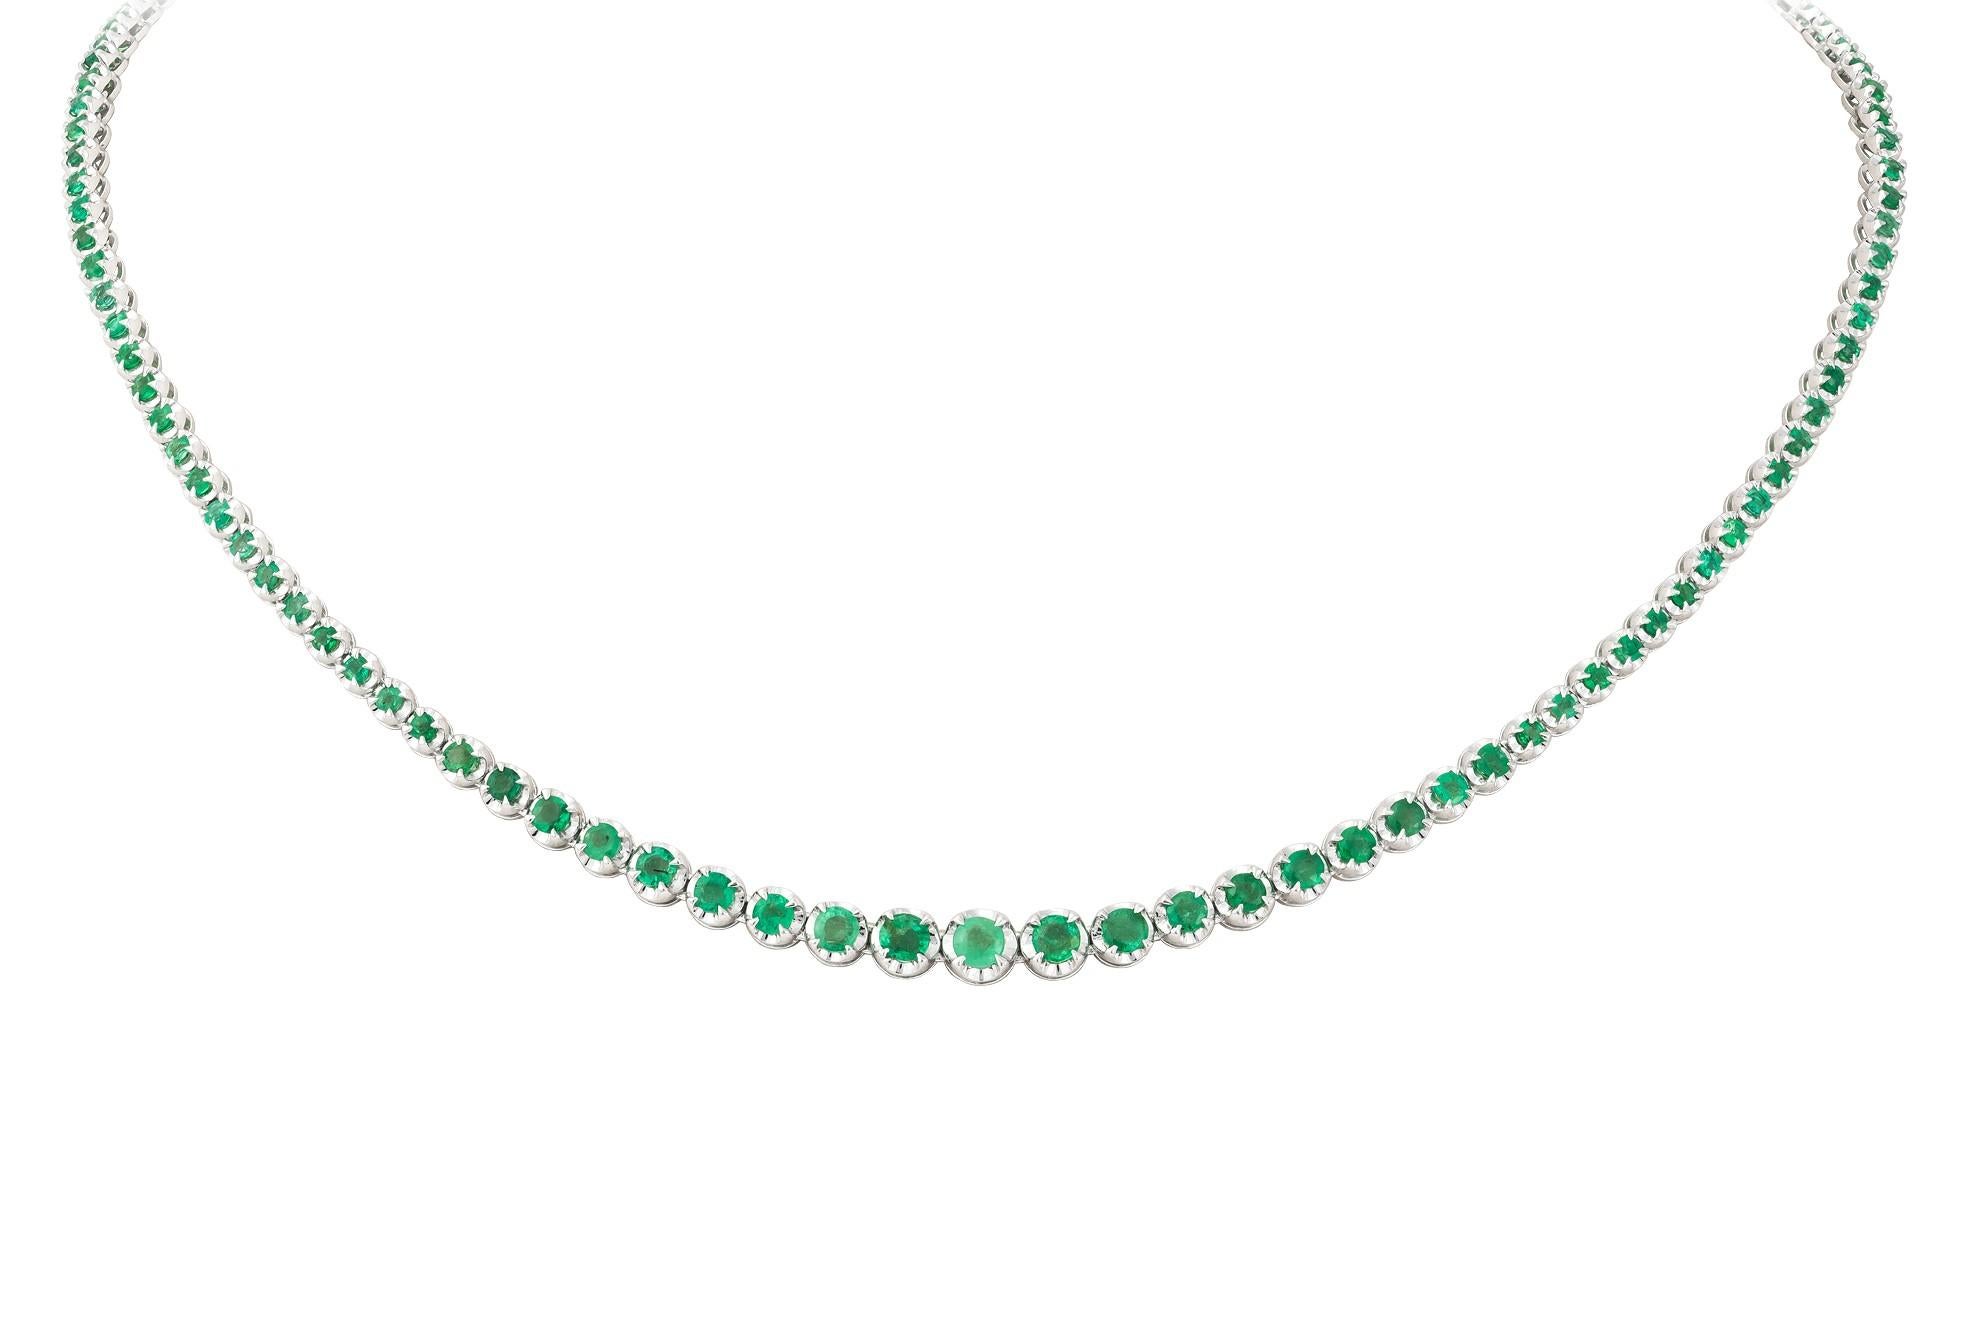 Mixed Cut NWT $9, 600 Rare Gorgeous 18KT Fancy Emerald Diamond Riviera Tennis Necklace For Sale